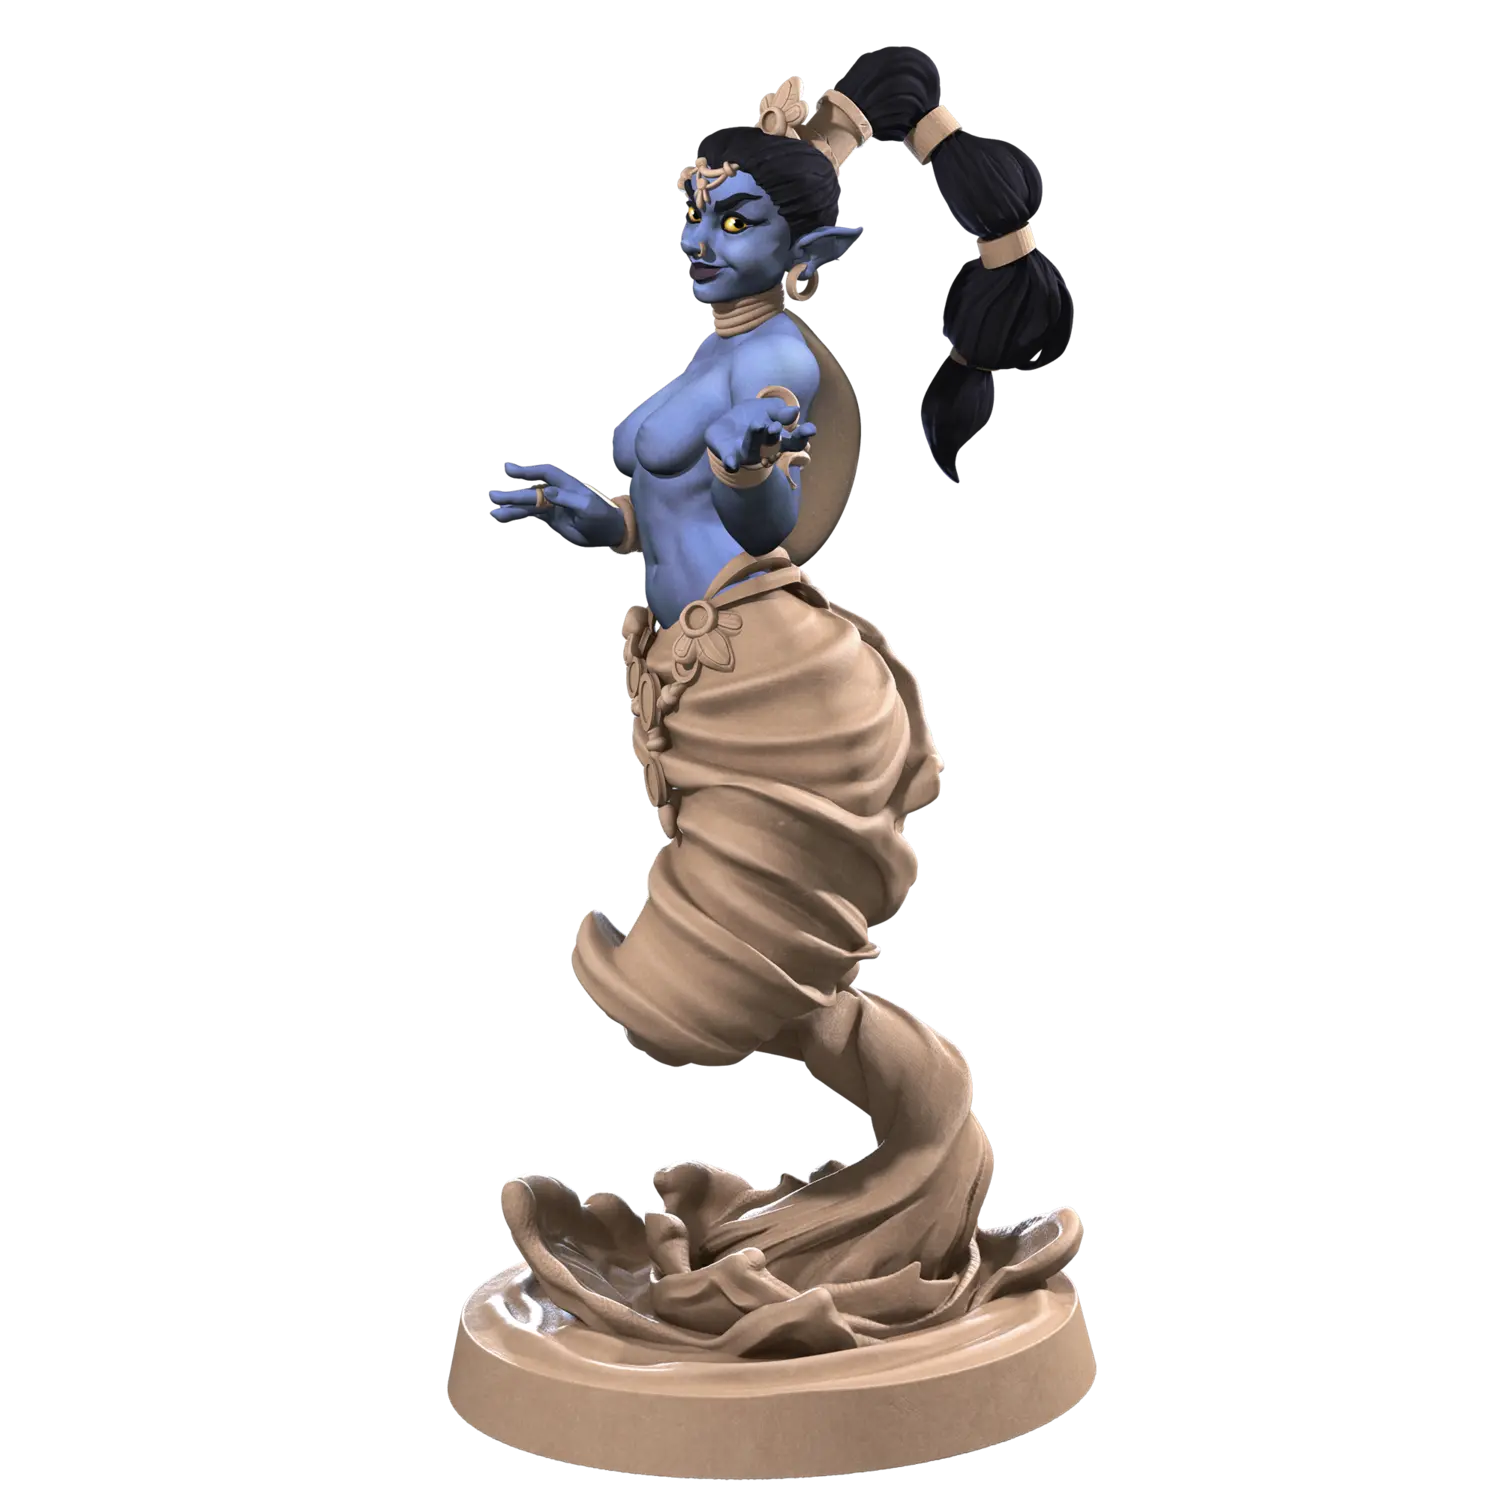 DnD Elementals - Miniature - Monsters - nsfw Jasmine, Air Djinn 01 Classic Elementals - Miniature - Monsters - nsfw sold by DoubleHitShop